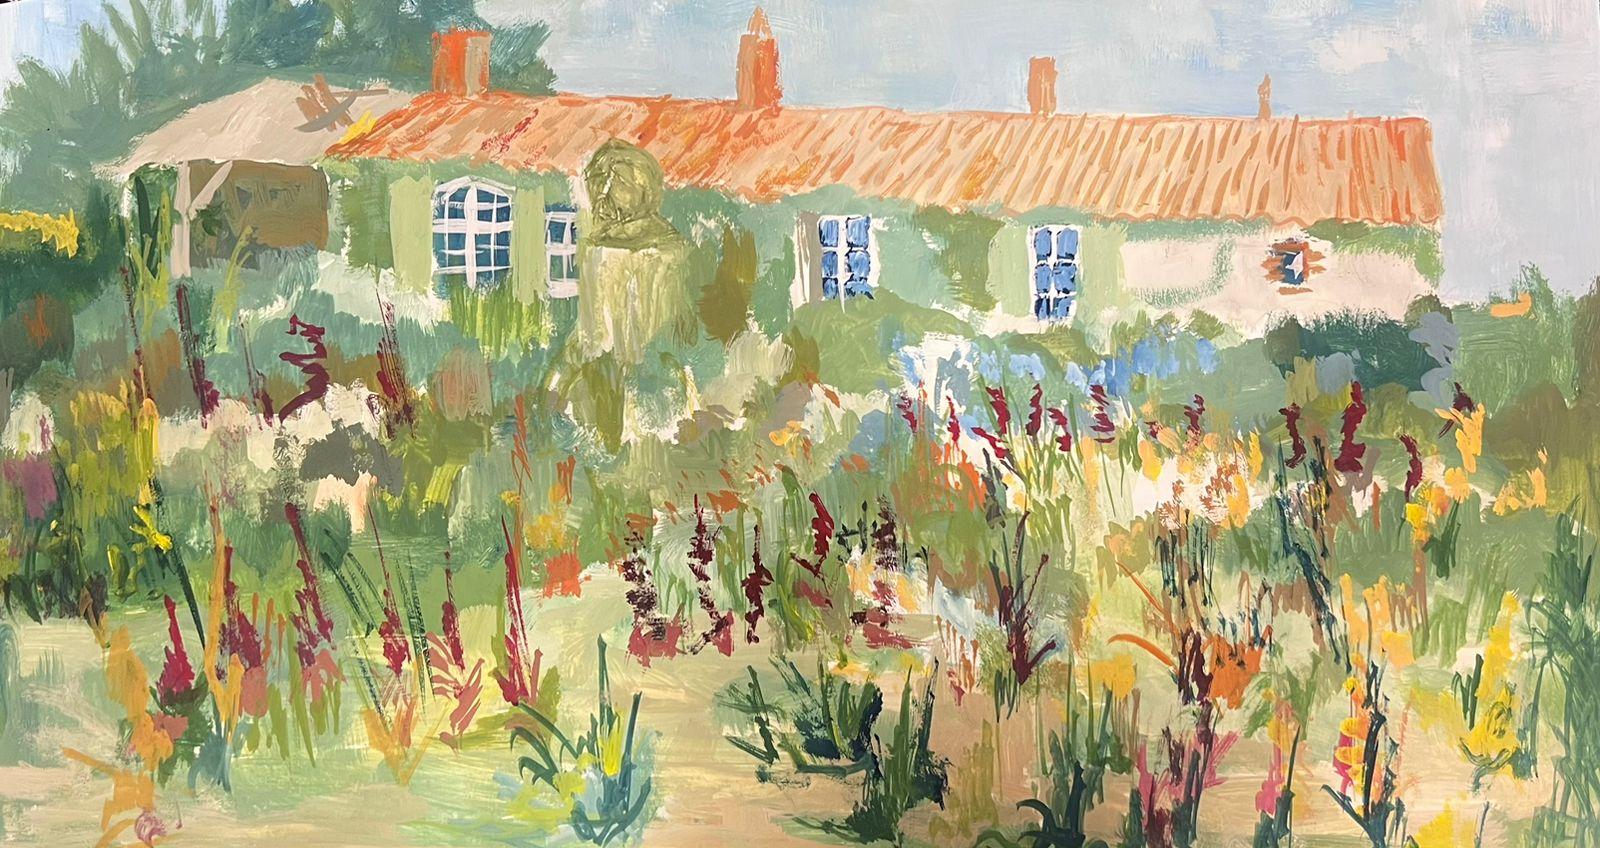 Bernard Labbe Landscape Painting - 1950's Modernist Painting Old French Farmhouse in Gardens looks like Monet's